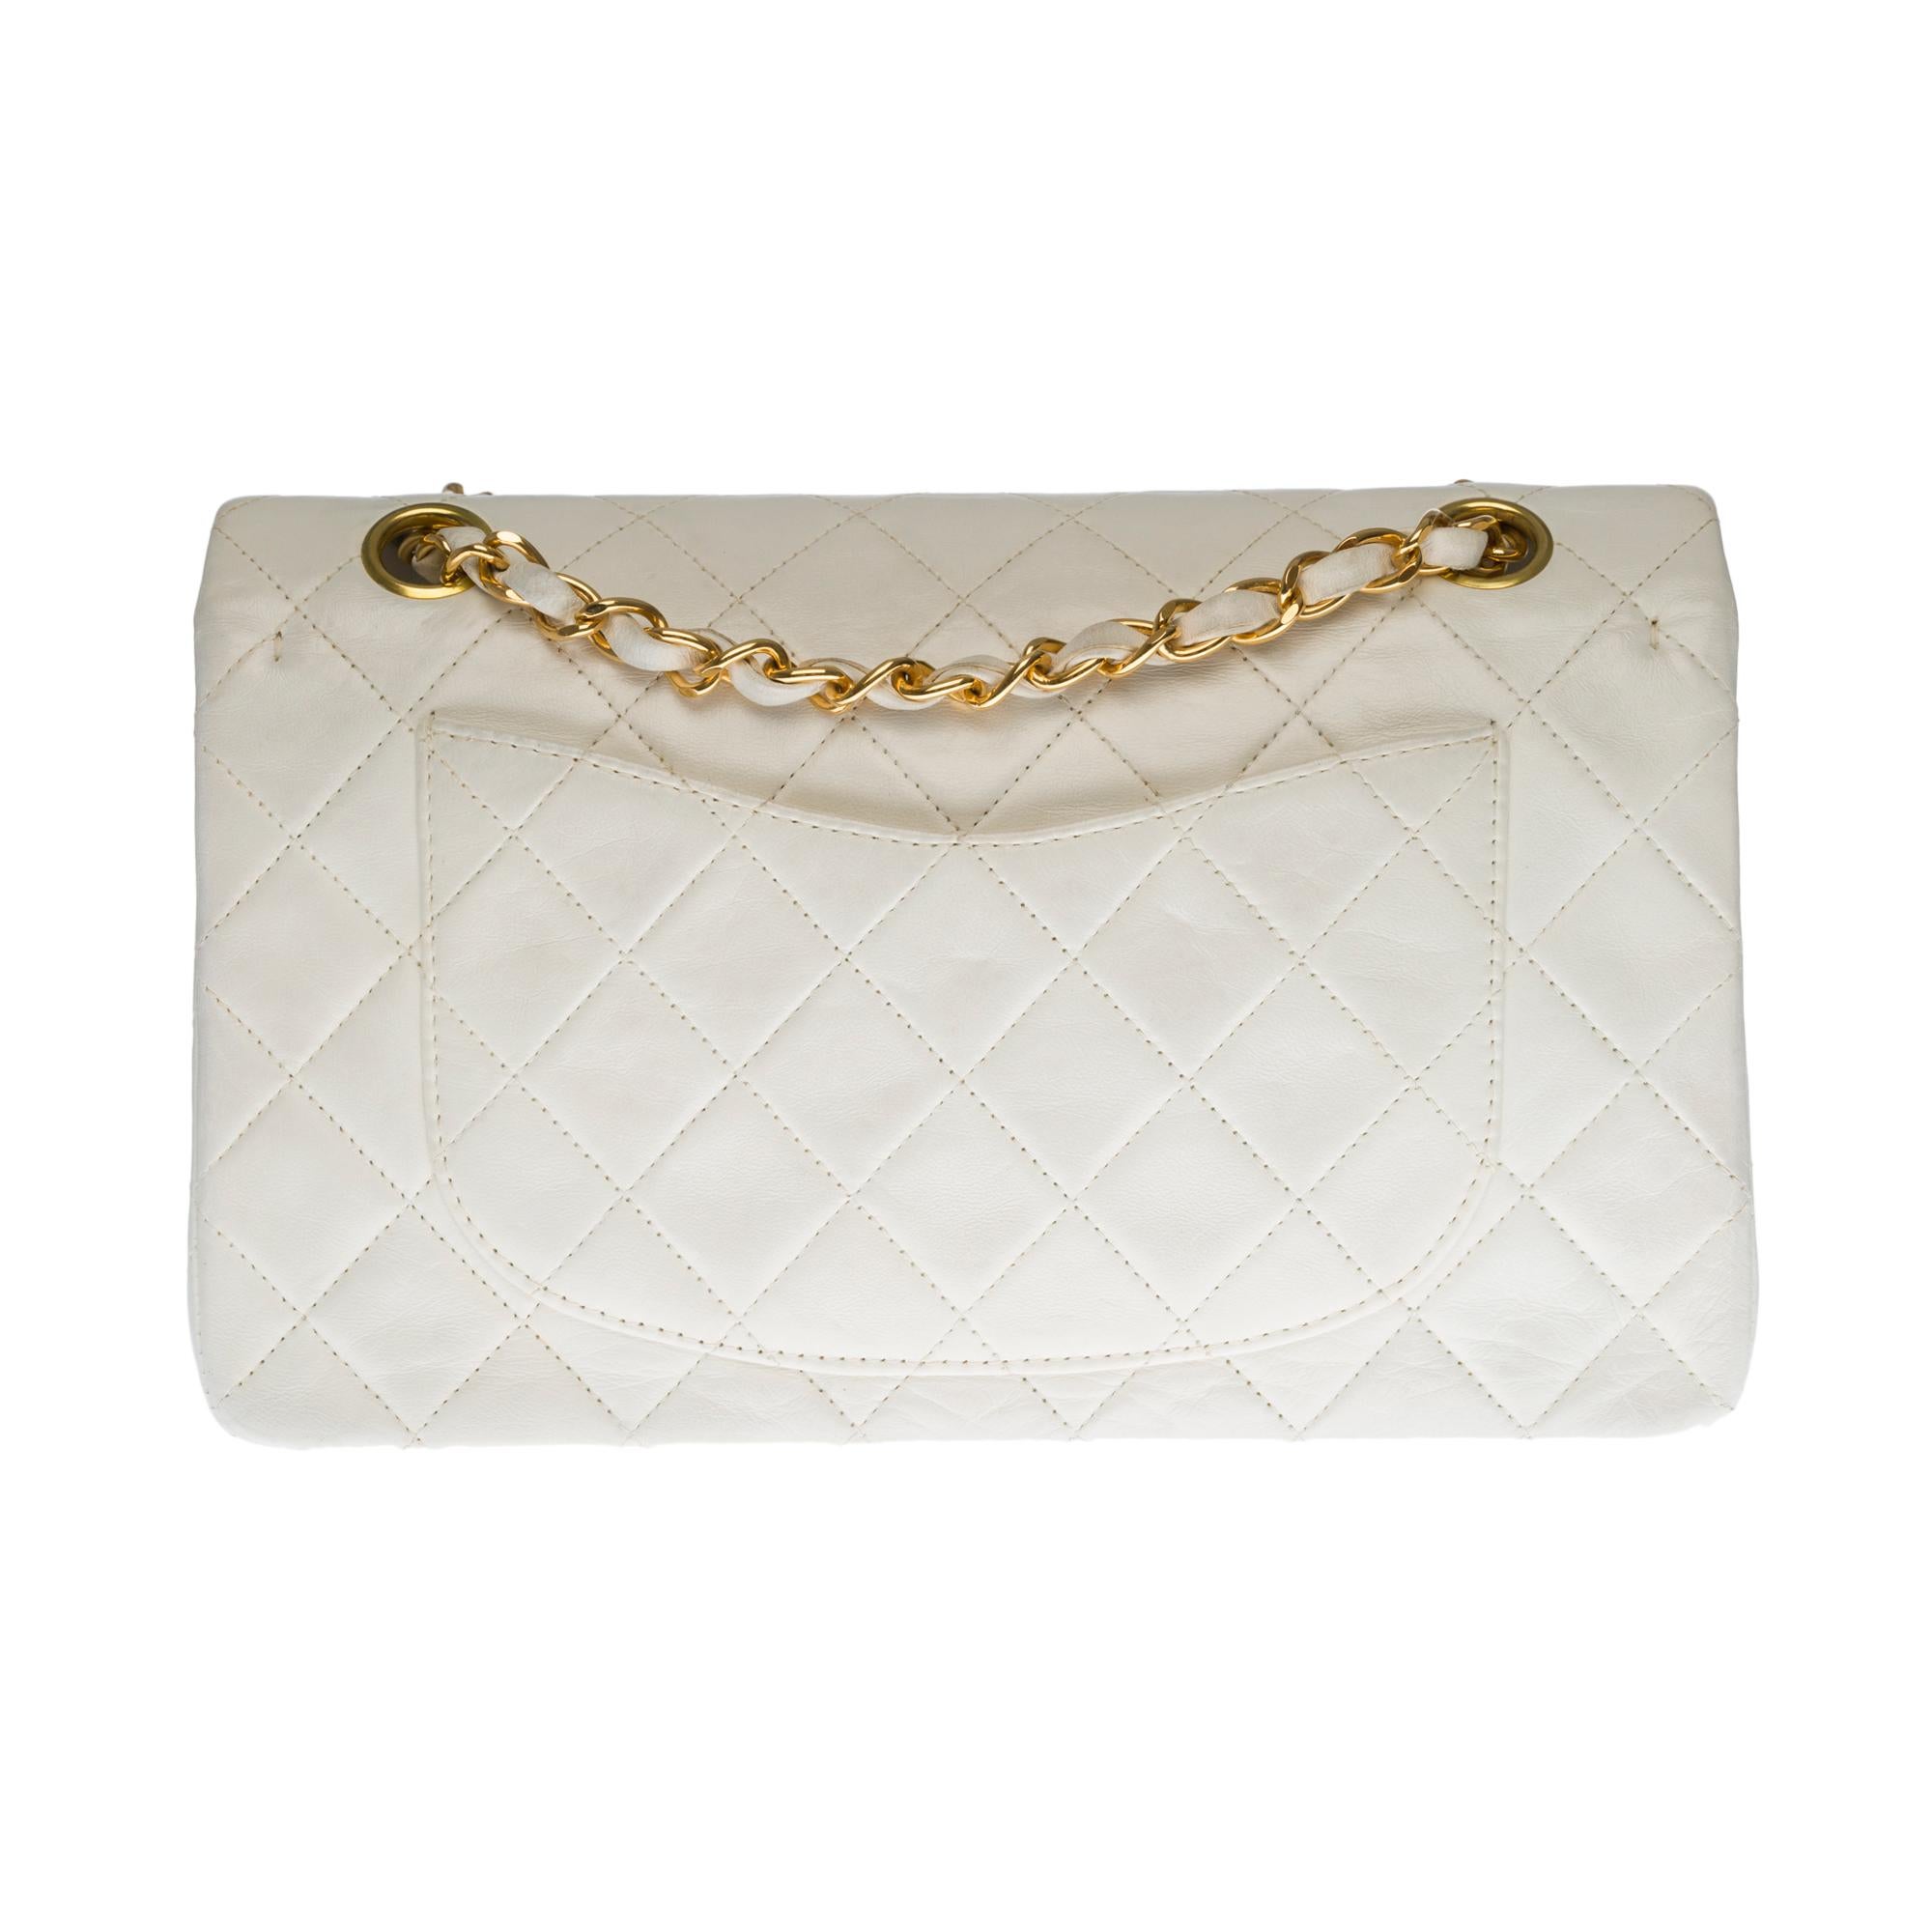 The coveted Chanel Timeless 23cm double flap bag in white quilted lambskin leather, gold metal hardware, gold metal chain intertwined with white leather for a shoulder and shoulder strap
Pocket on the back of the bag
Flap closure, gold-tone CC logo